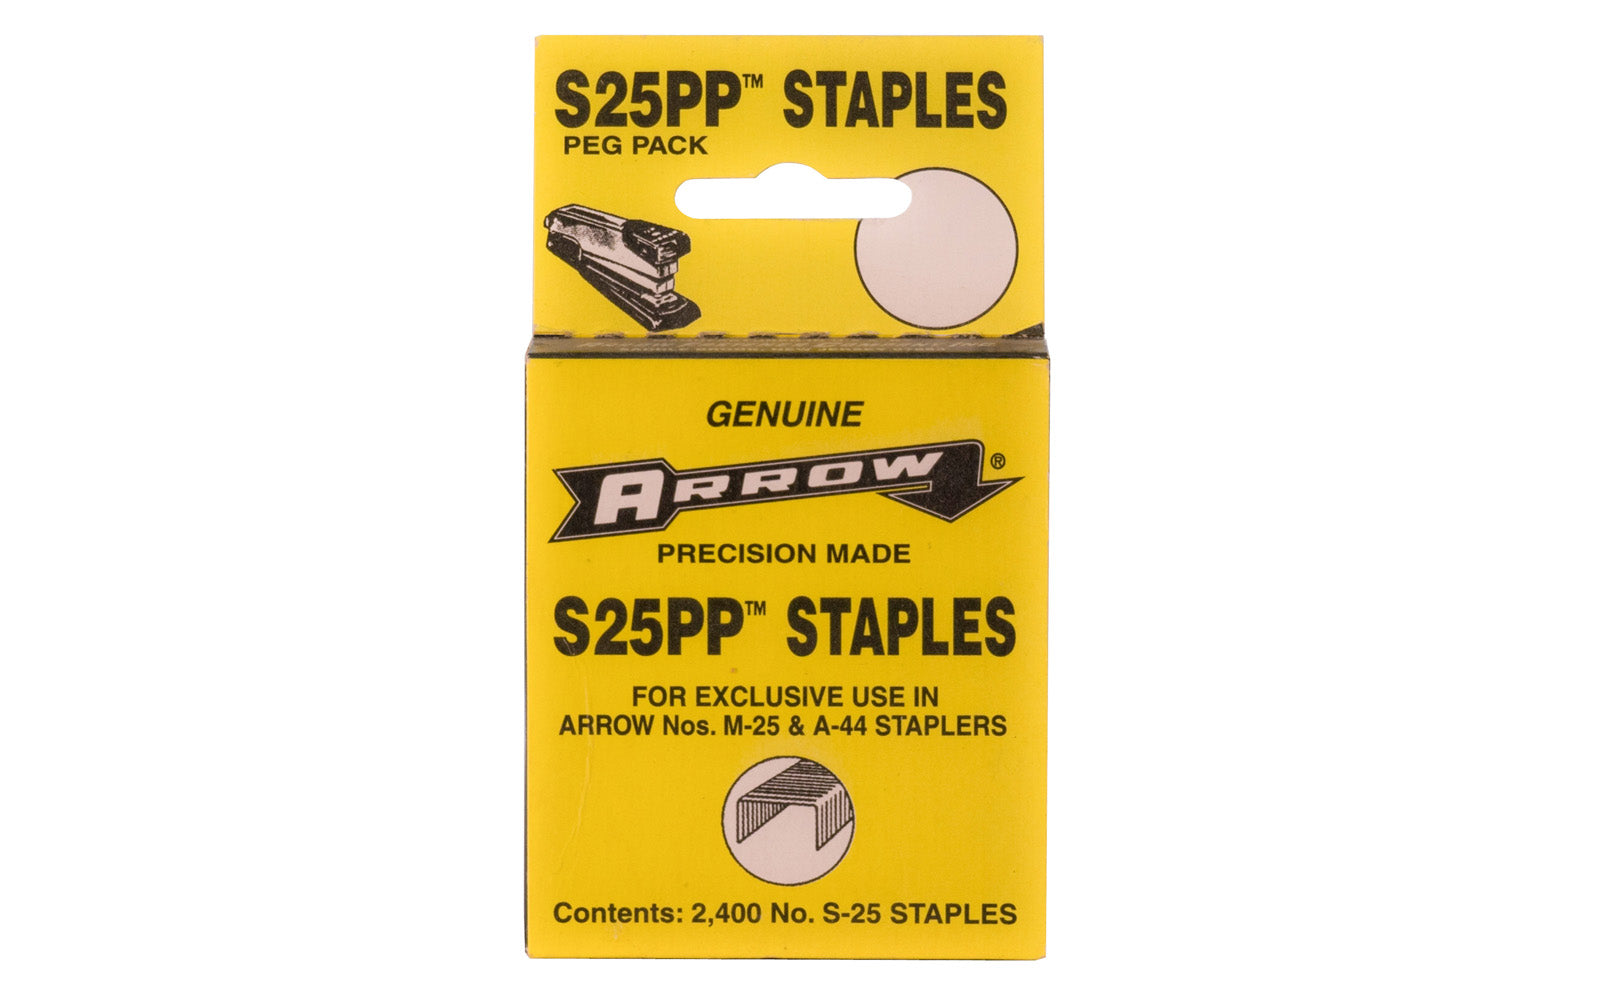 Arrow S25PP Staples. Designed for use in Arrow No. M-25 & A-44 Staplers. Contains 2,400 No. S-25 Staples. Made in USA. 079055251002